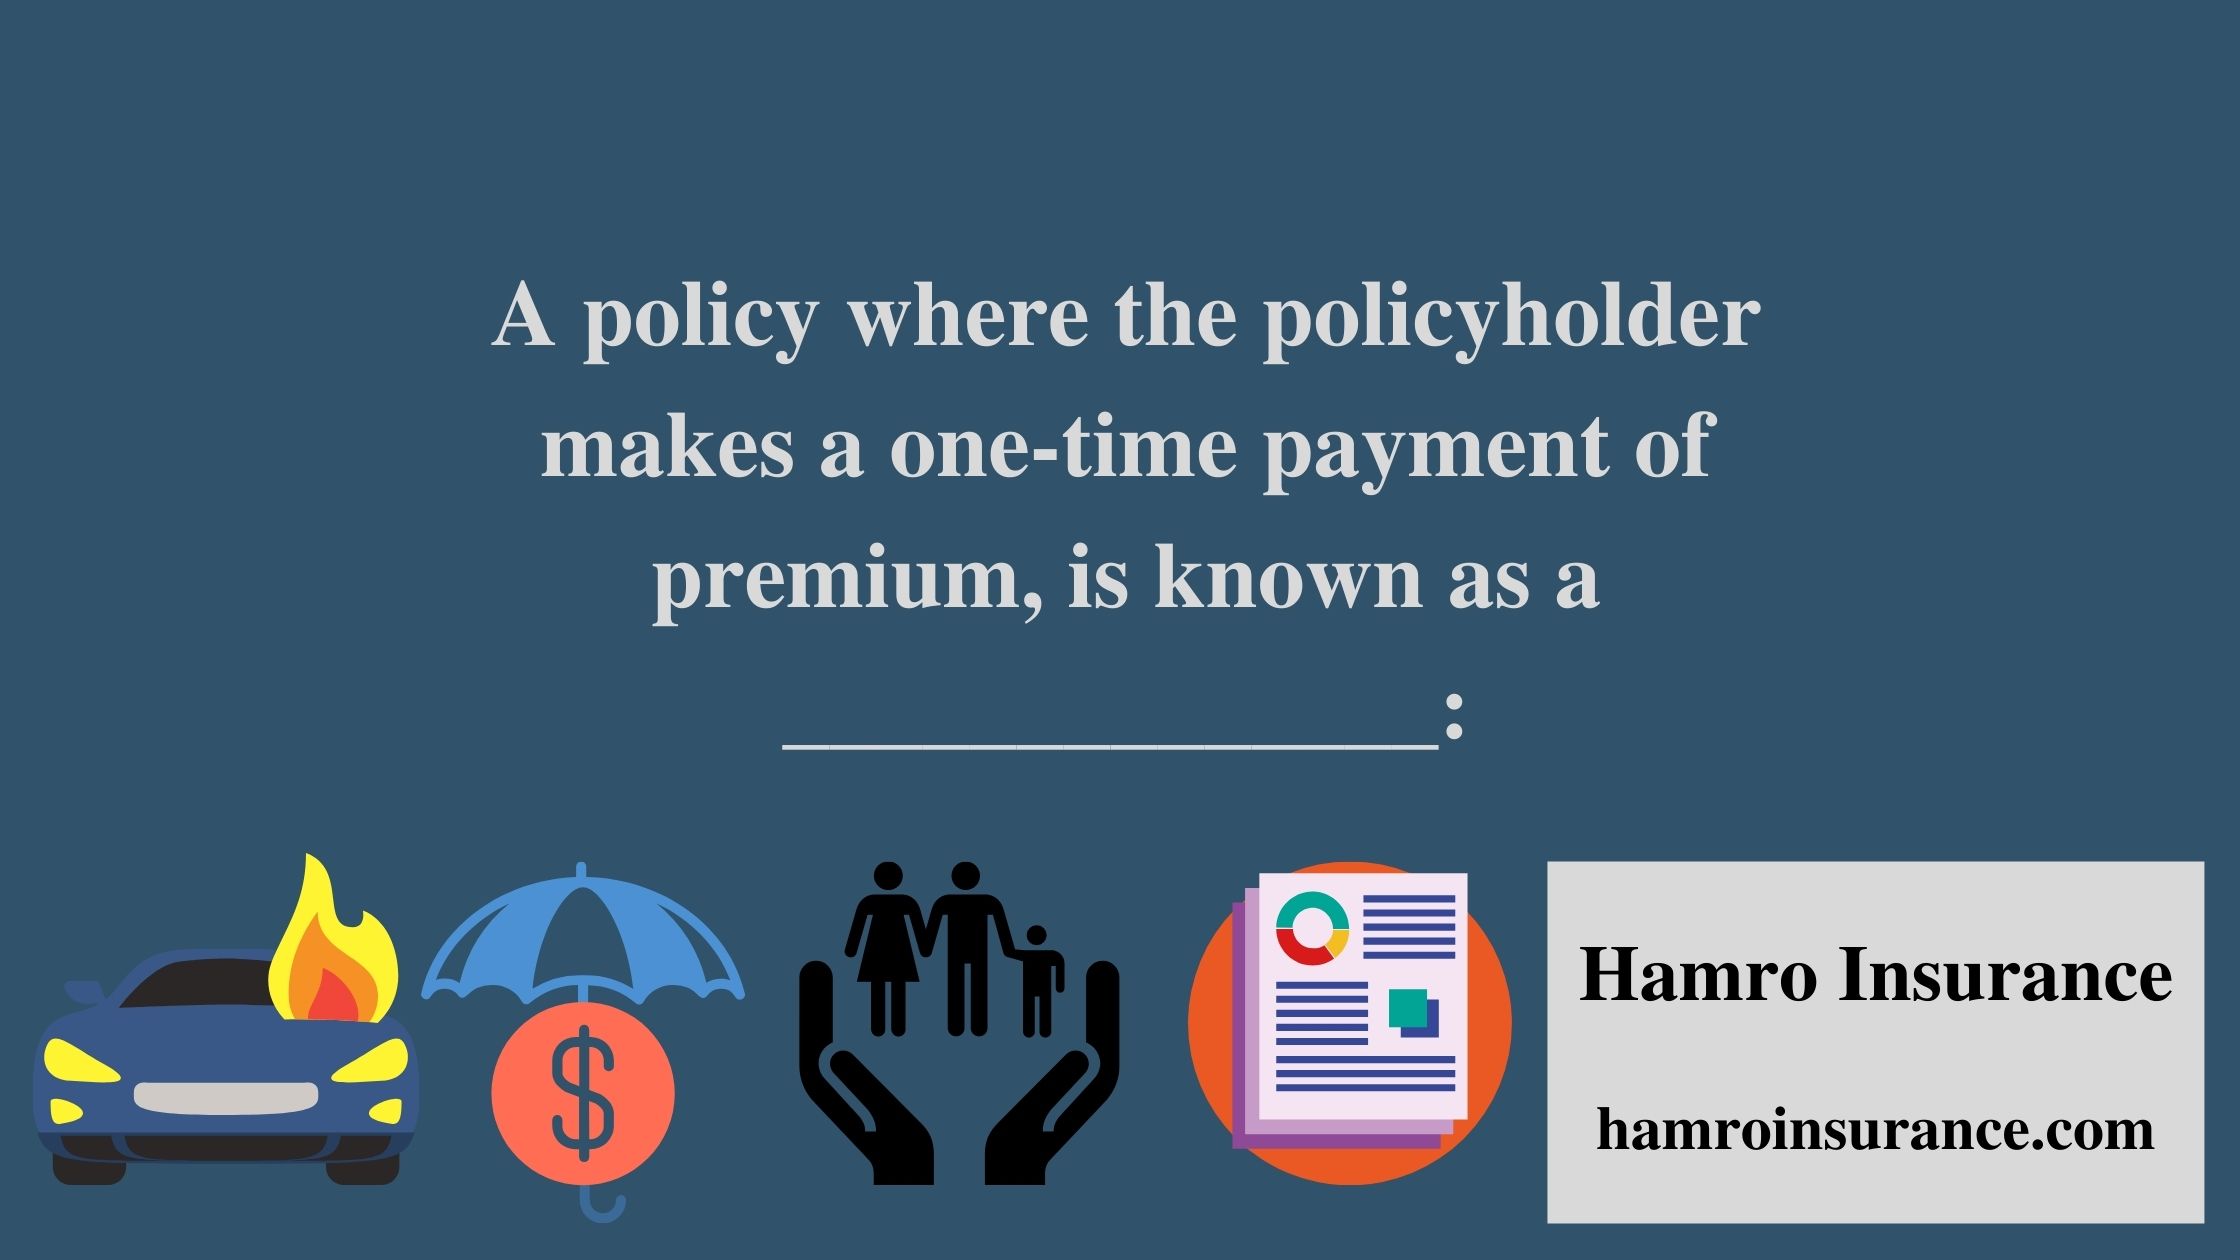 A policy where the policyholder makes a one-time payment of premium, is known as a ______________: